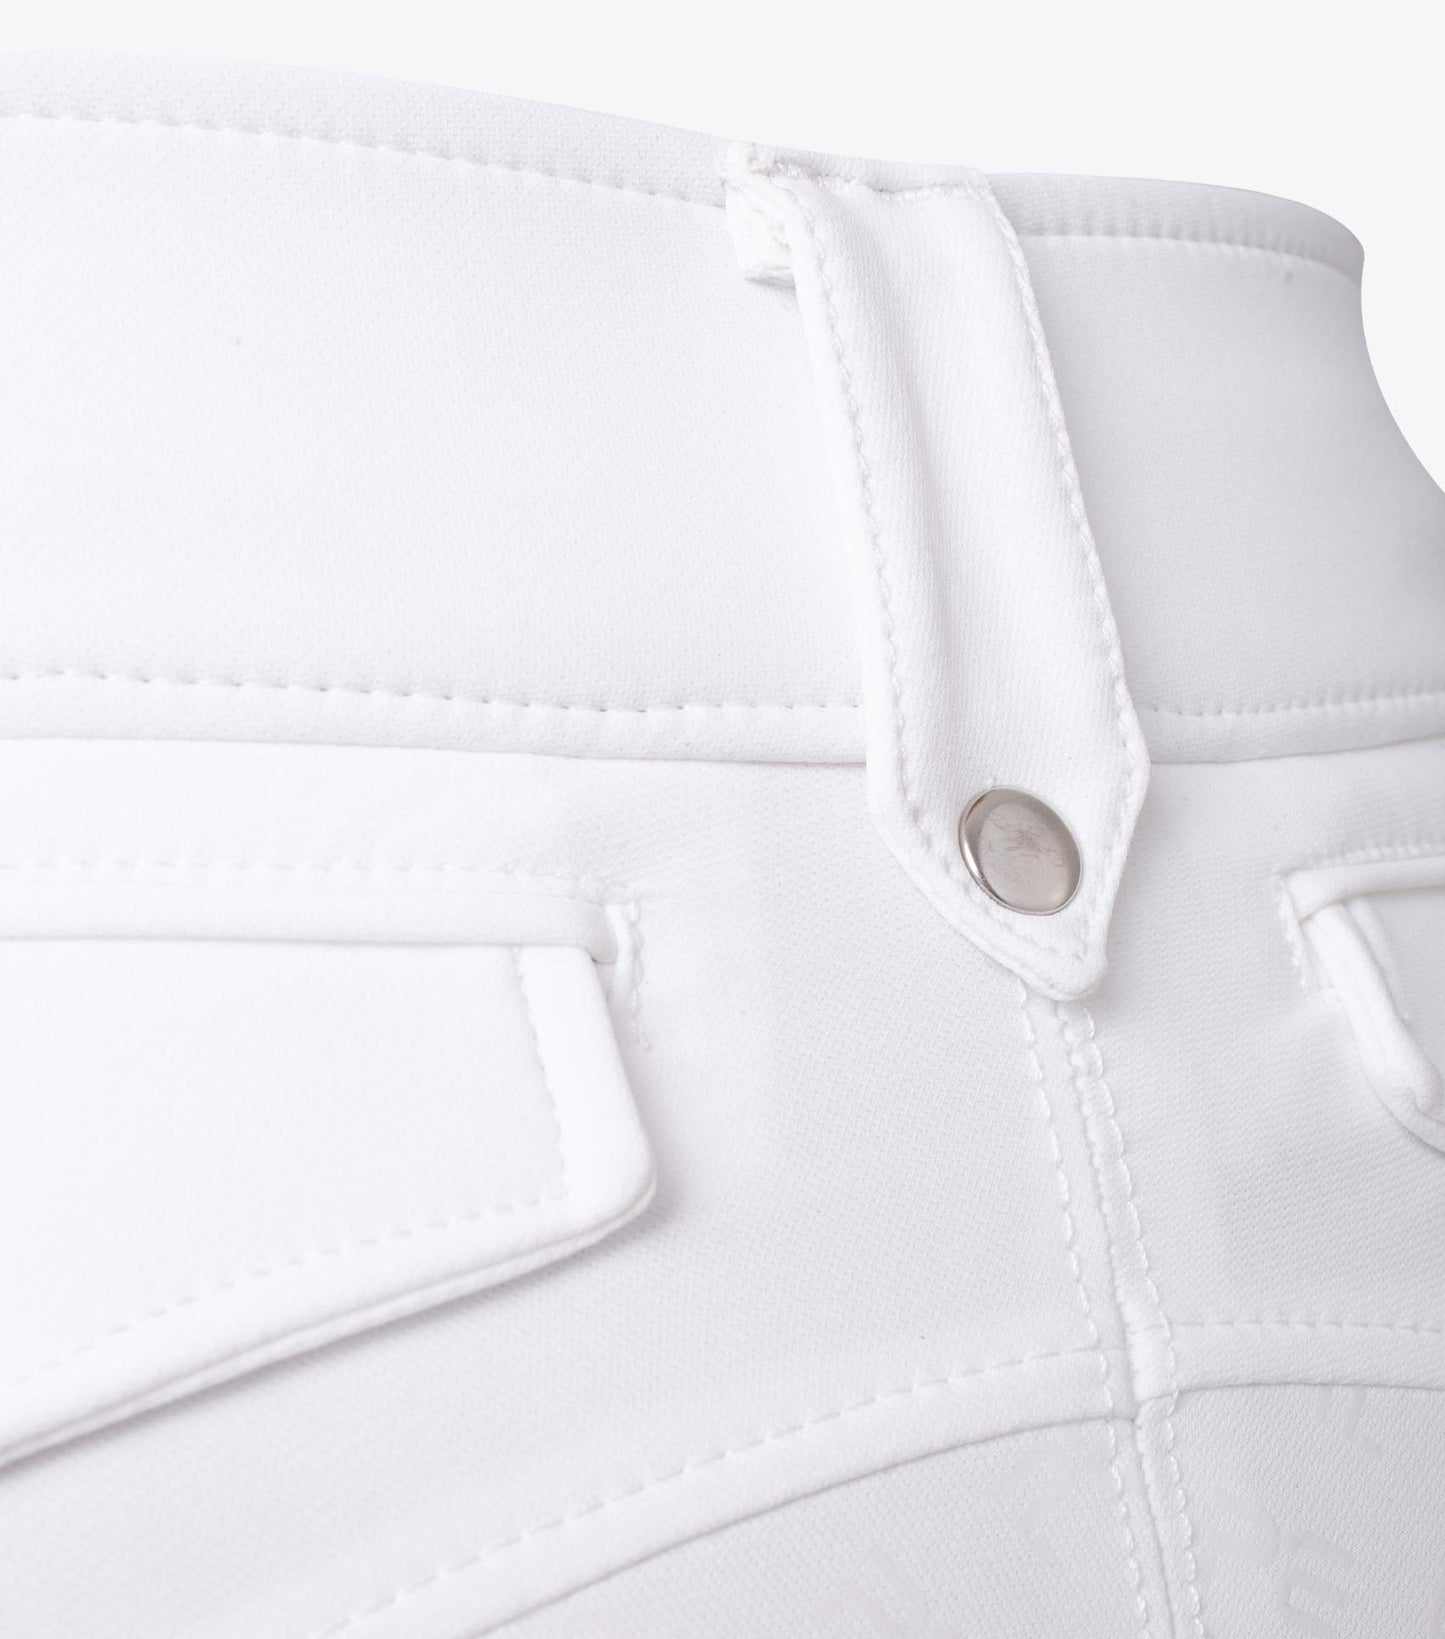 Premier Equine Torino Ladies White Full Seat Gel Riding Breeches (high waisted, water repellant) - White